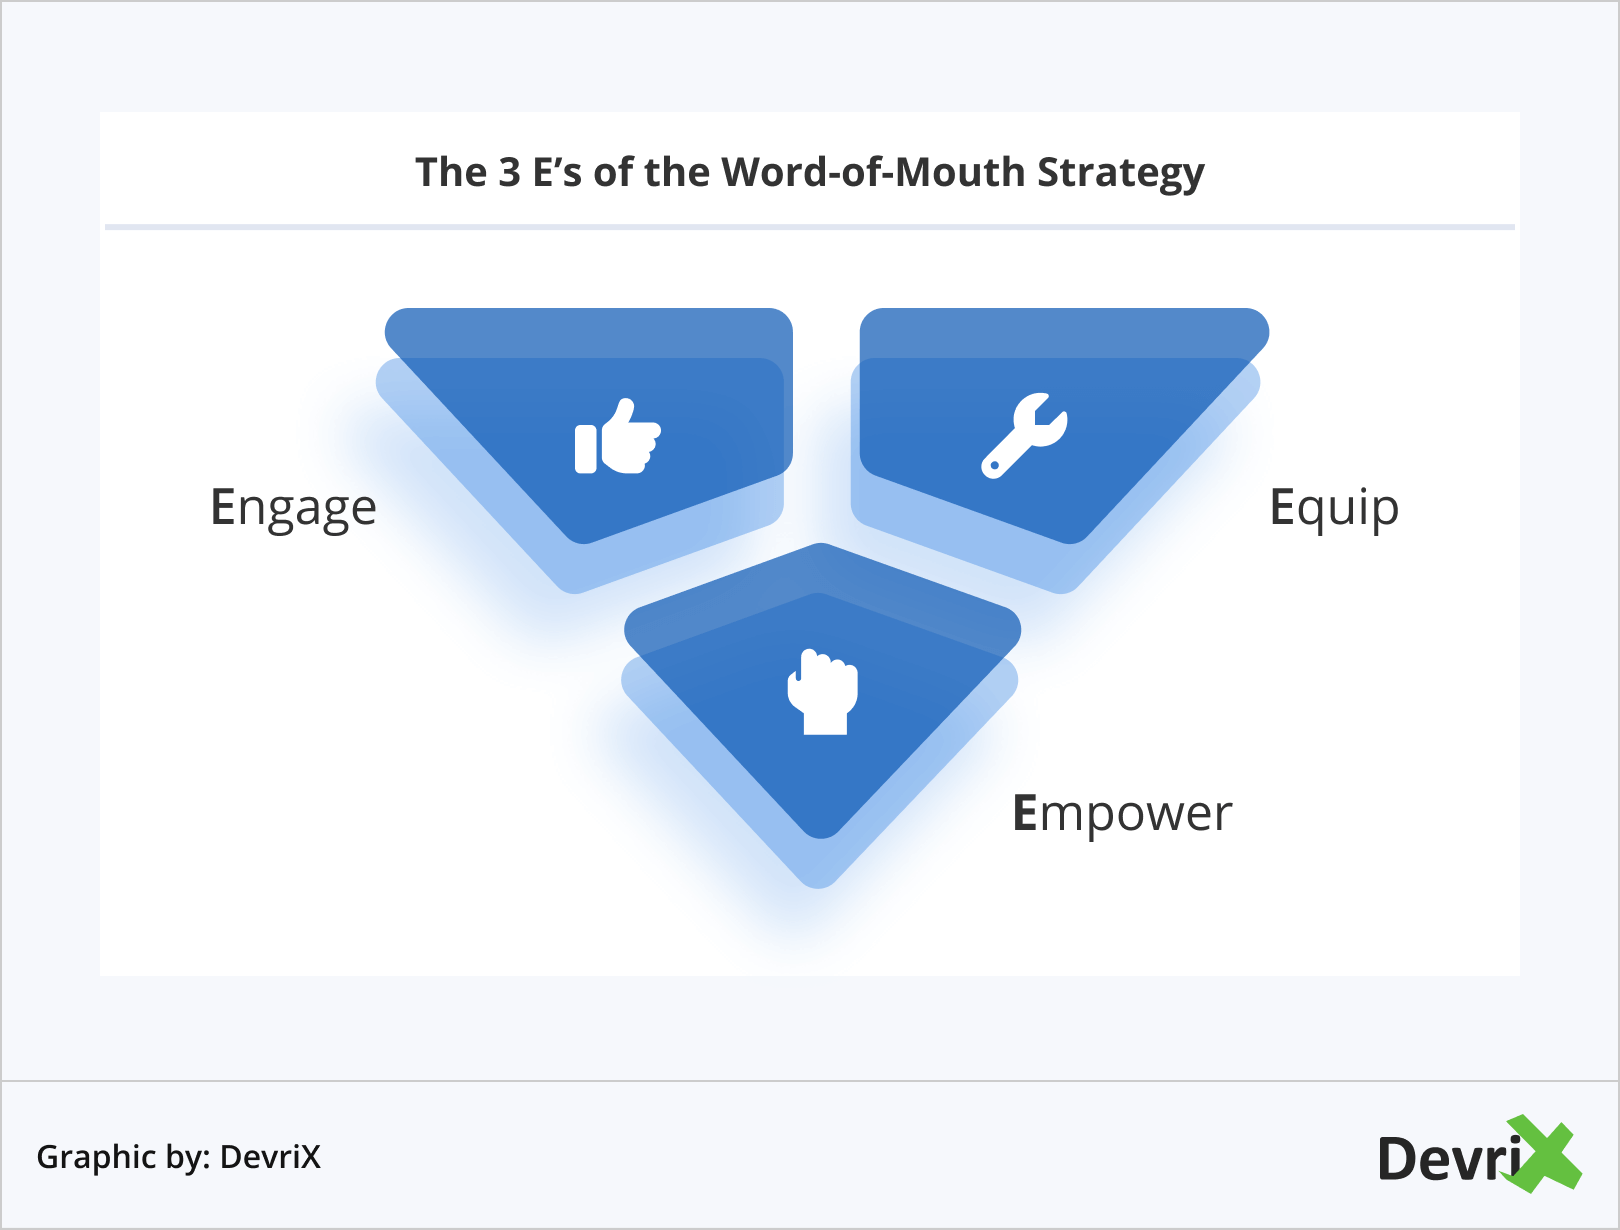 The 3 E’s of the Word-of-Mouth Strategy